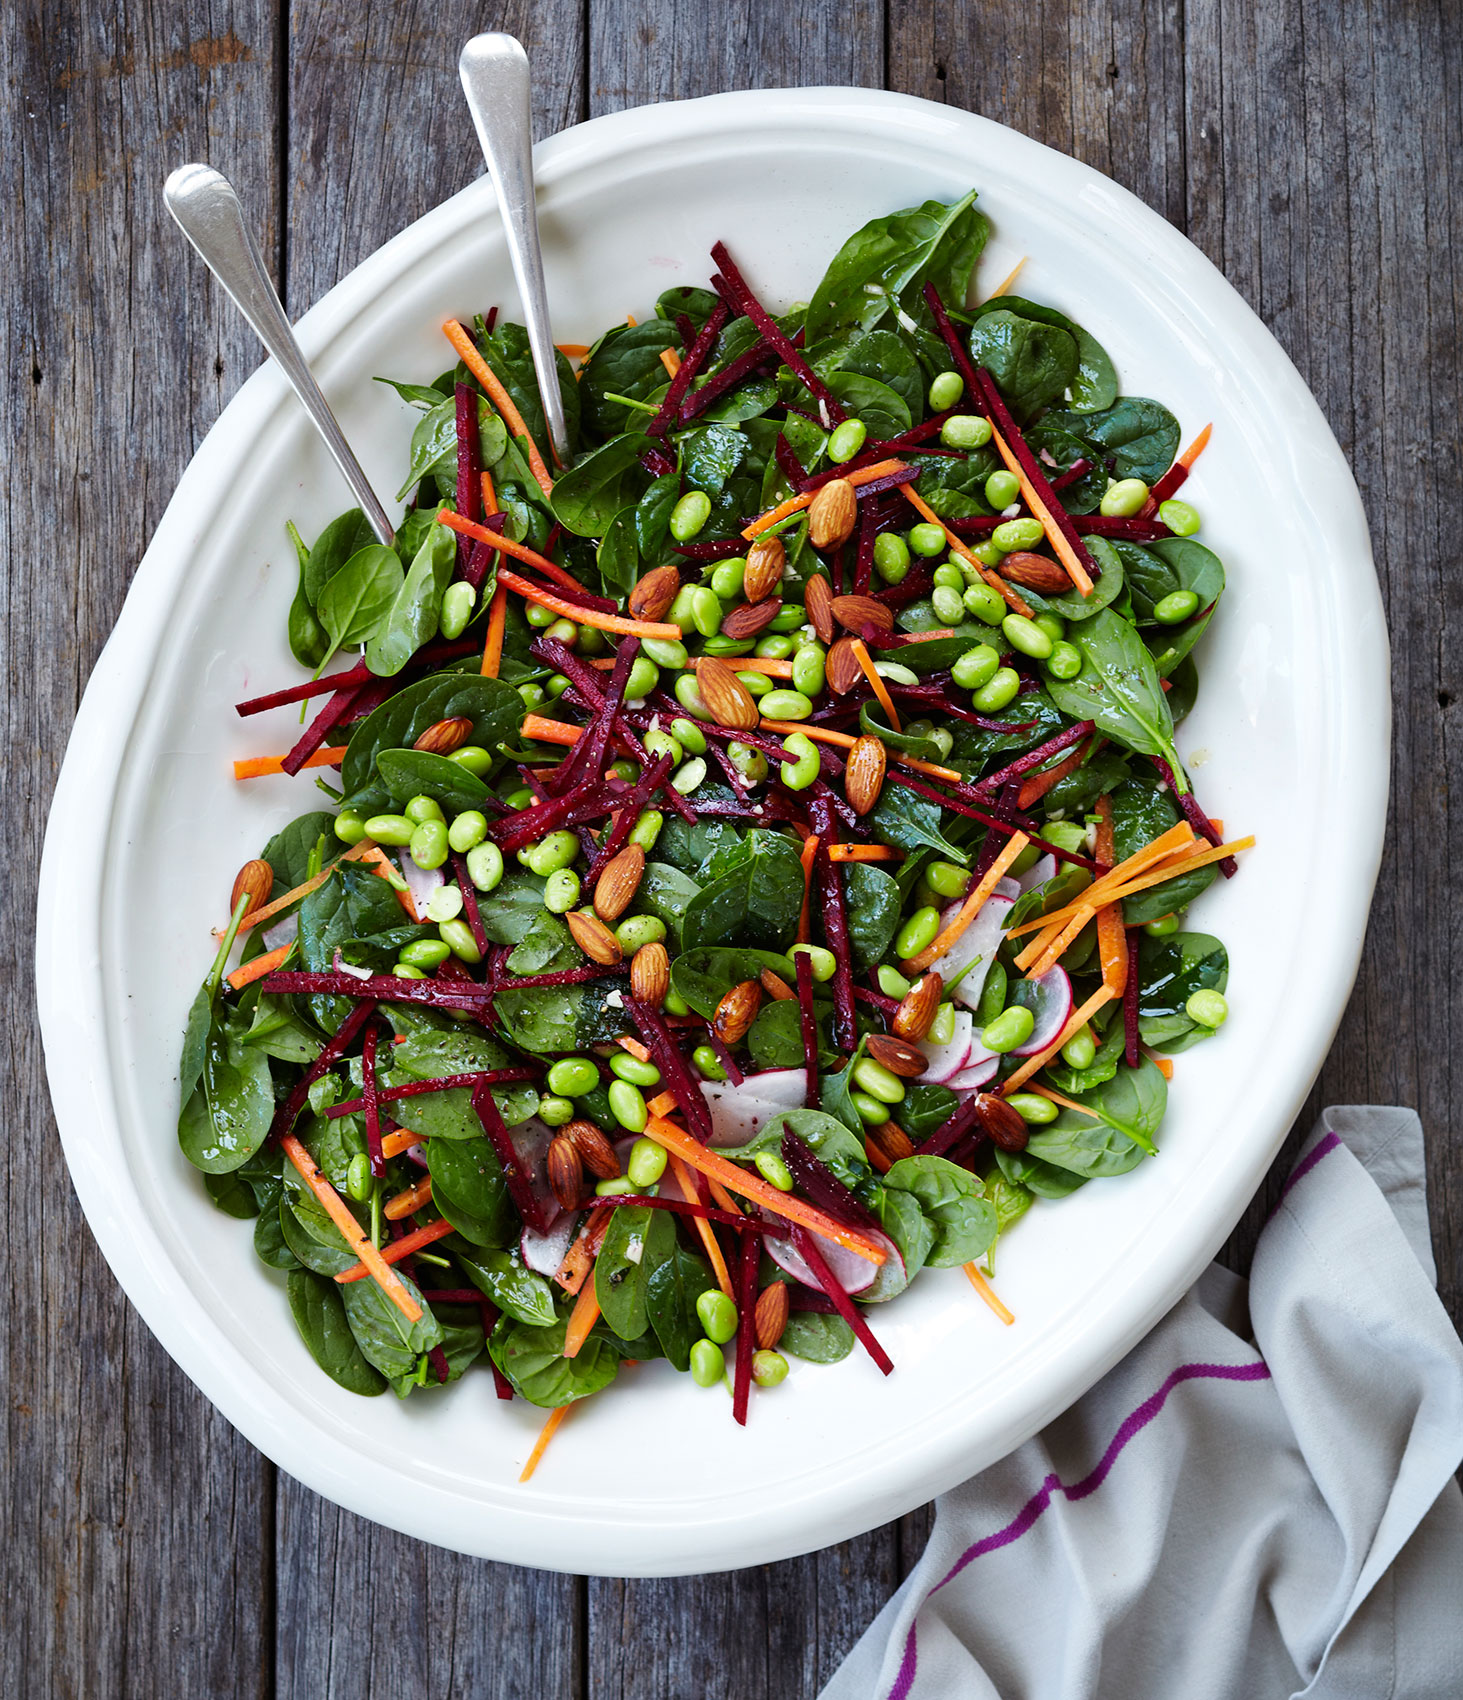 Free Range in the City • Power Salad with Soy Beans, Almonds, Carrots & Beets • Cookbook & Lifestyle Food Photography